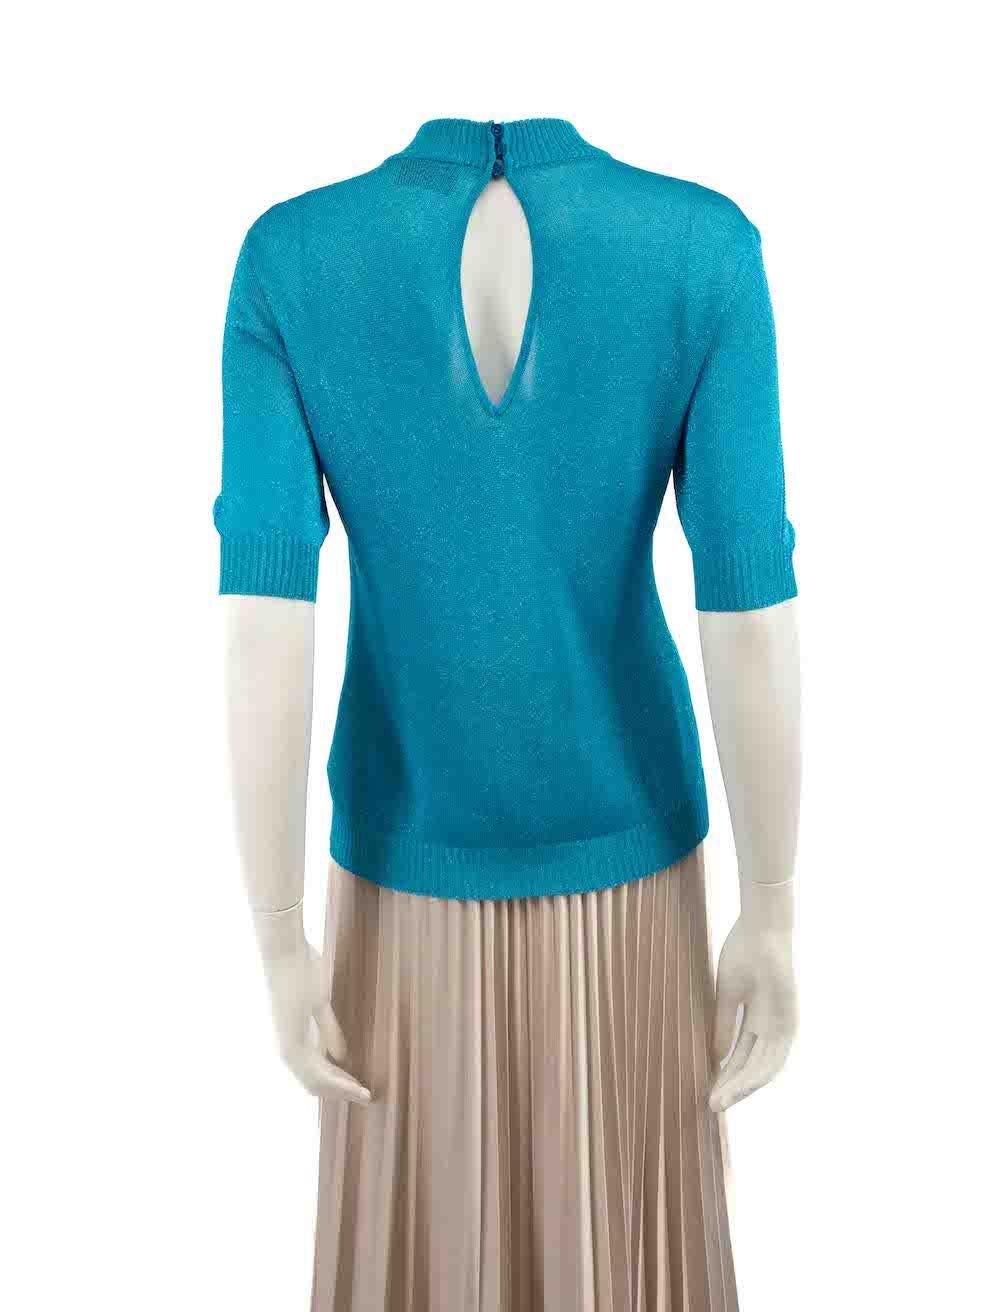 Missoni Blue Metallic Sheer Knitted Top Size L In Good Condition For Sale In London, GB